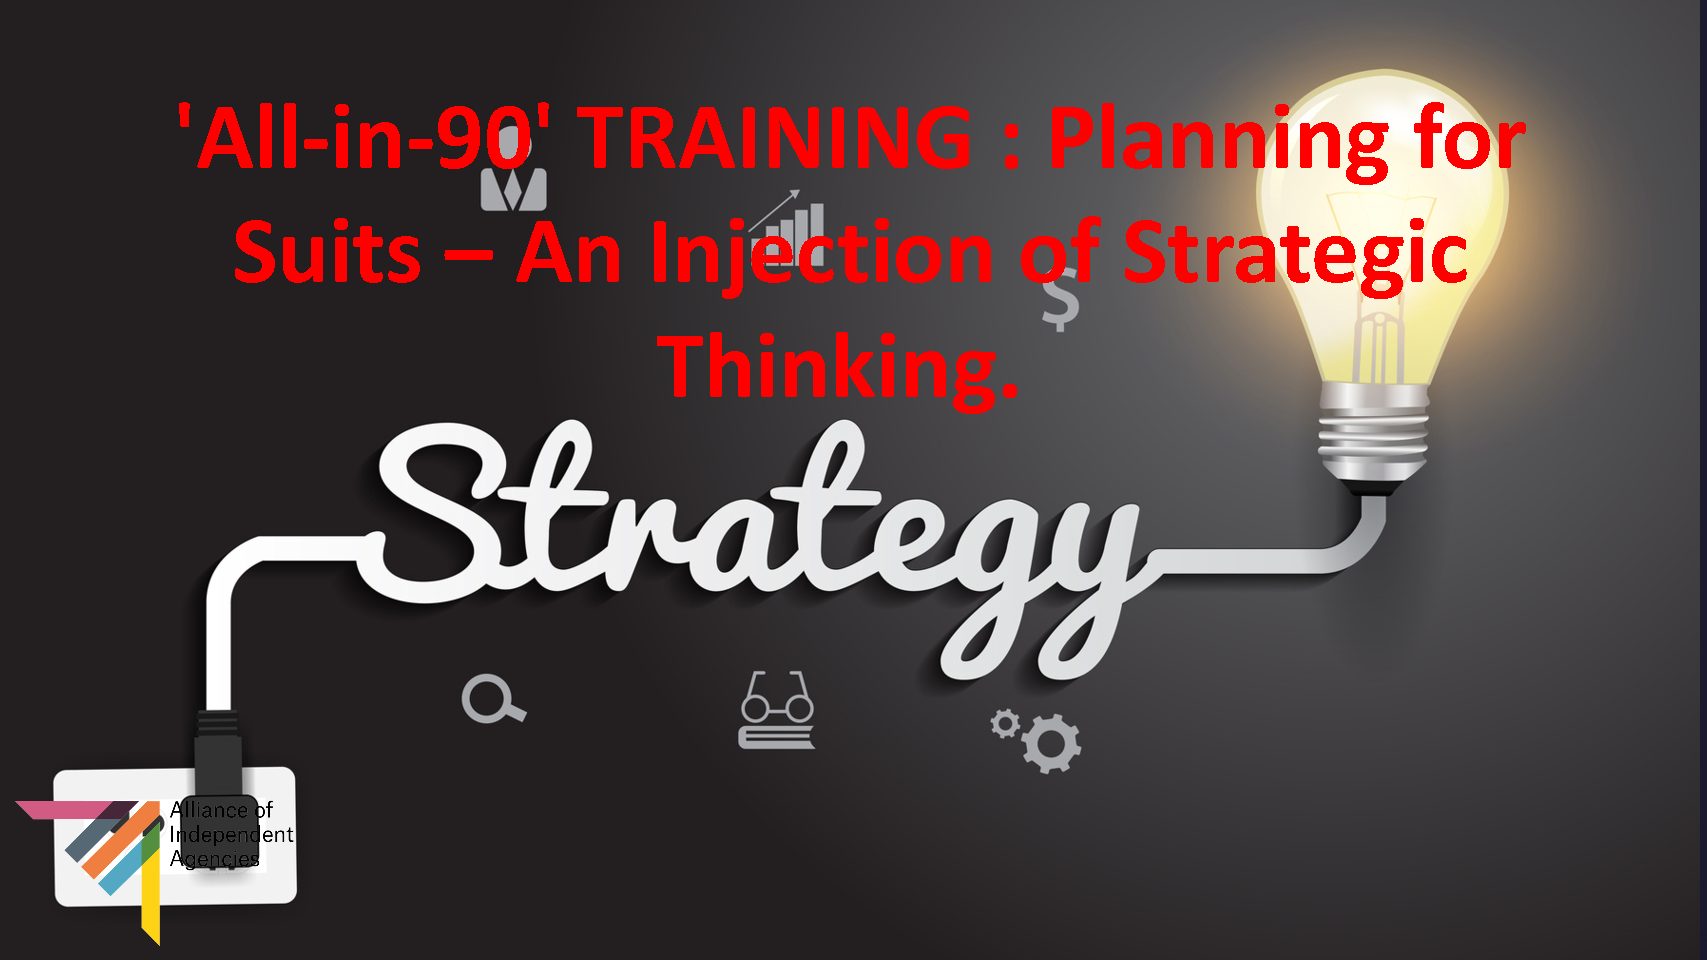 'All-in-90' TRAINING : Planning for Suits - An Injection of Strategic Thinking